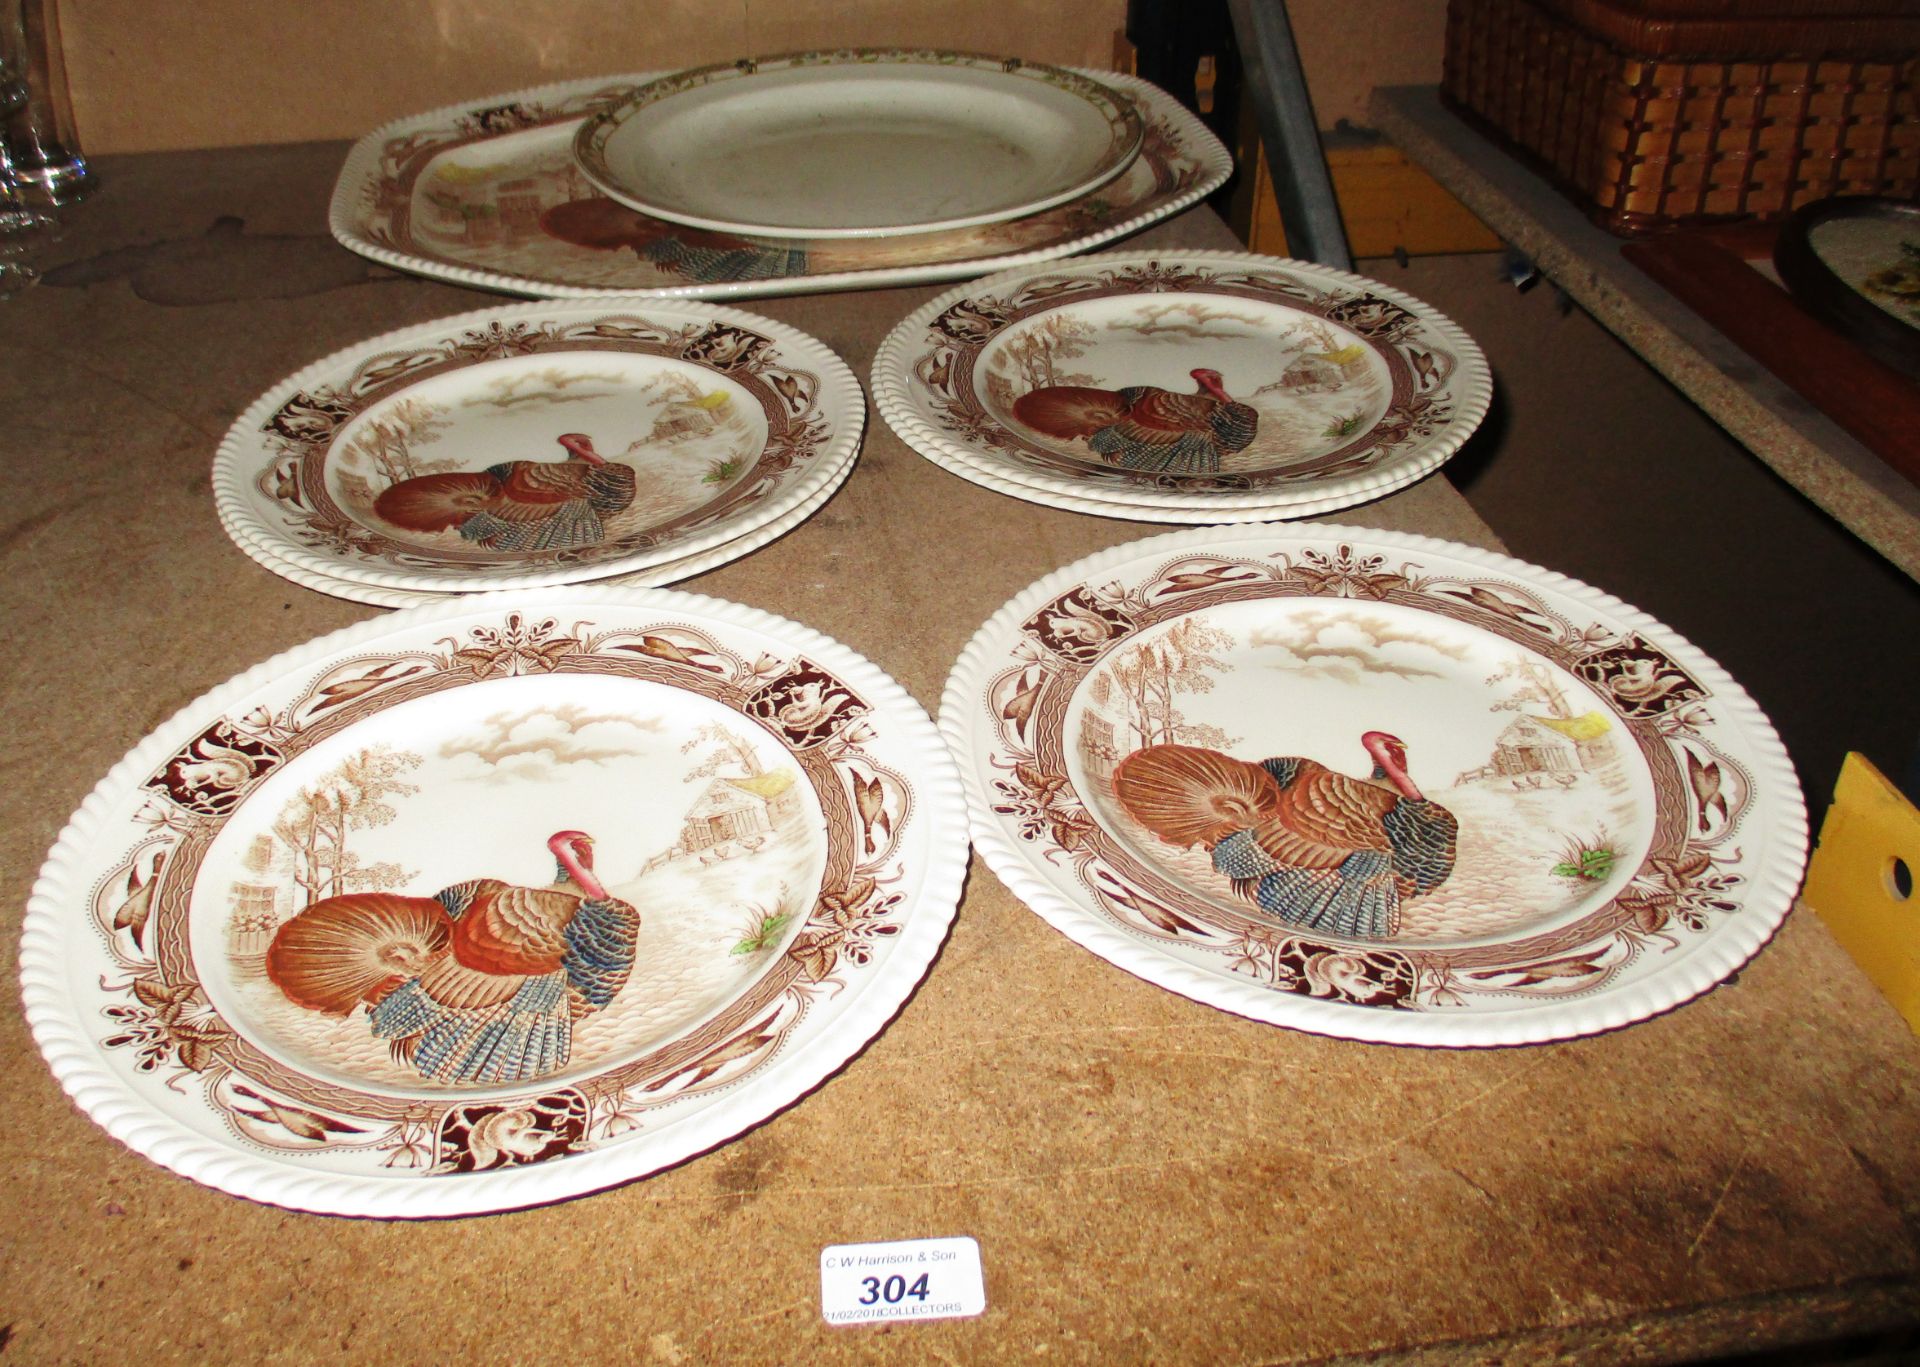 7 x Johnson Bros 'Barnyard King' plates (6 x dinner plates and a meat plate) and a J & G Meakin